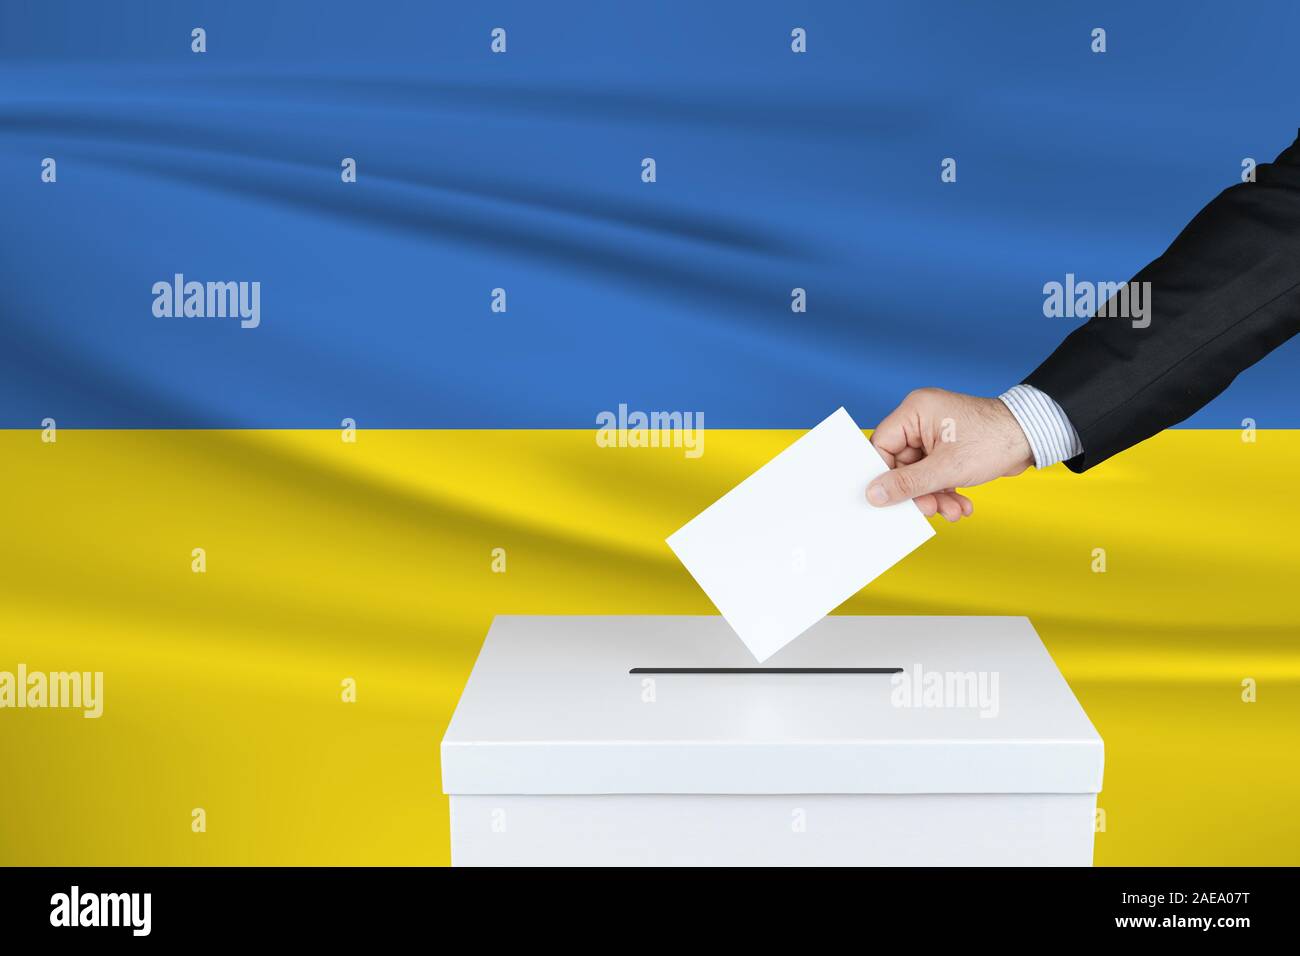 Election in Ukraine. The hand of man putting his vote in the ballot box. Waved Ukraine flag on background. Stock Photo